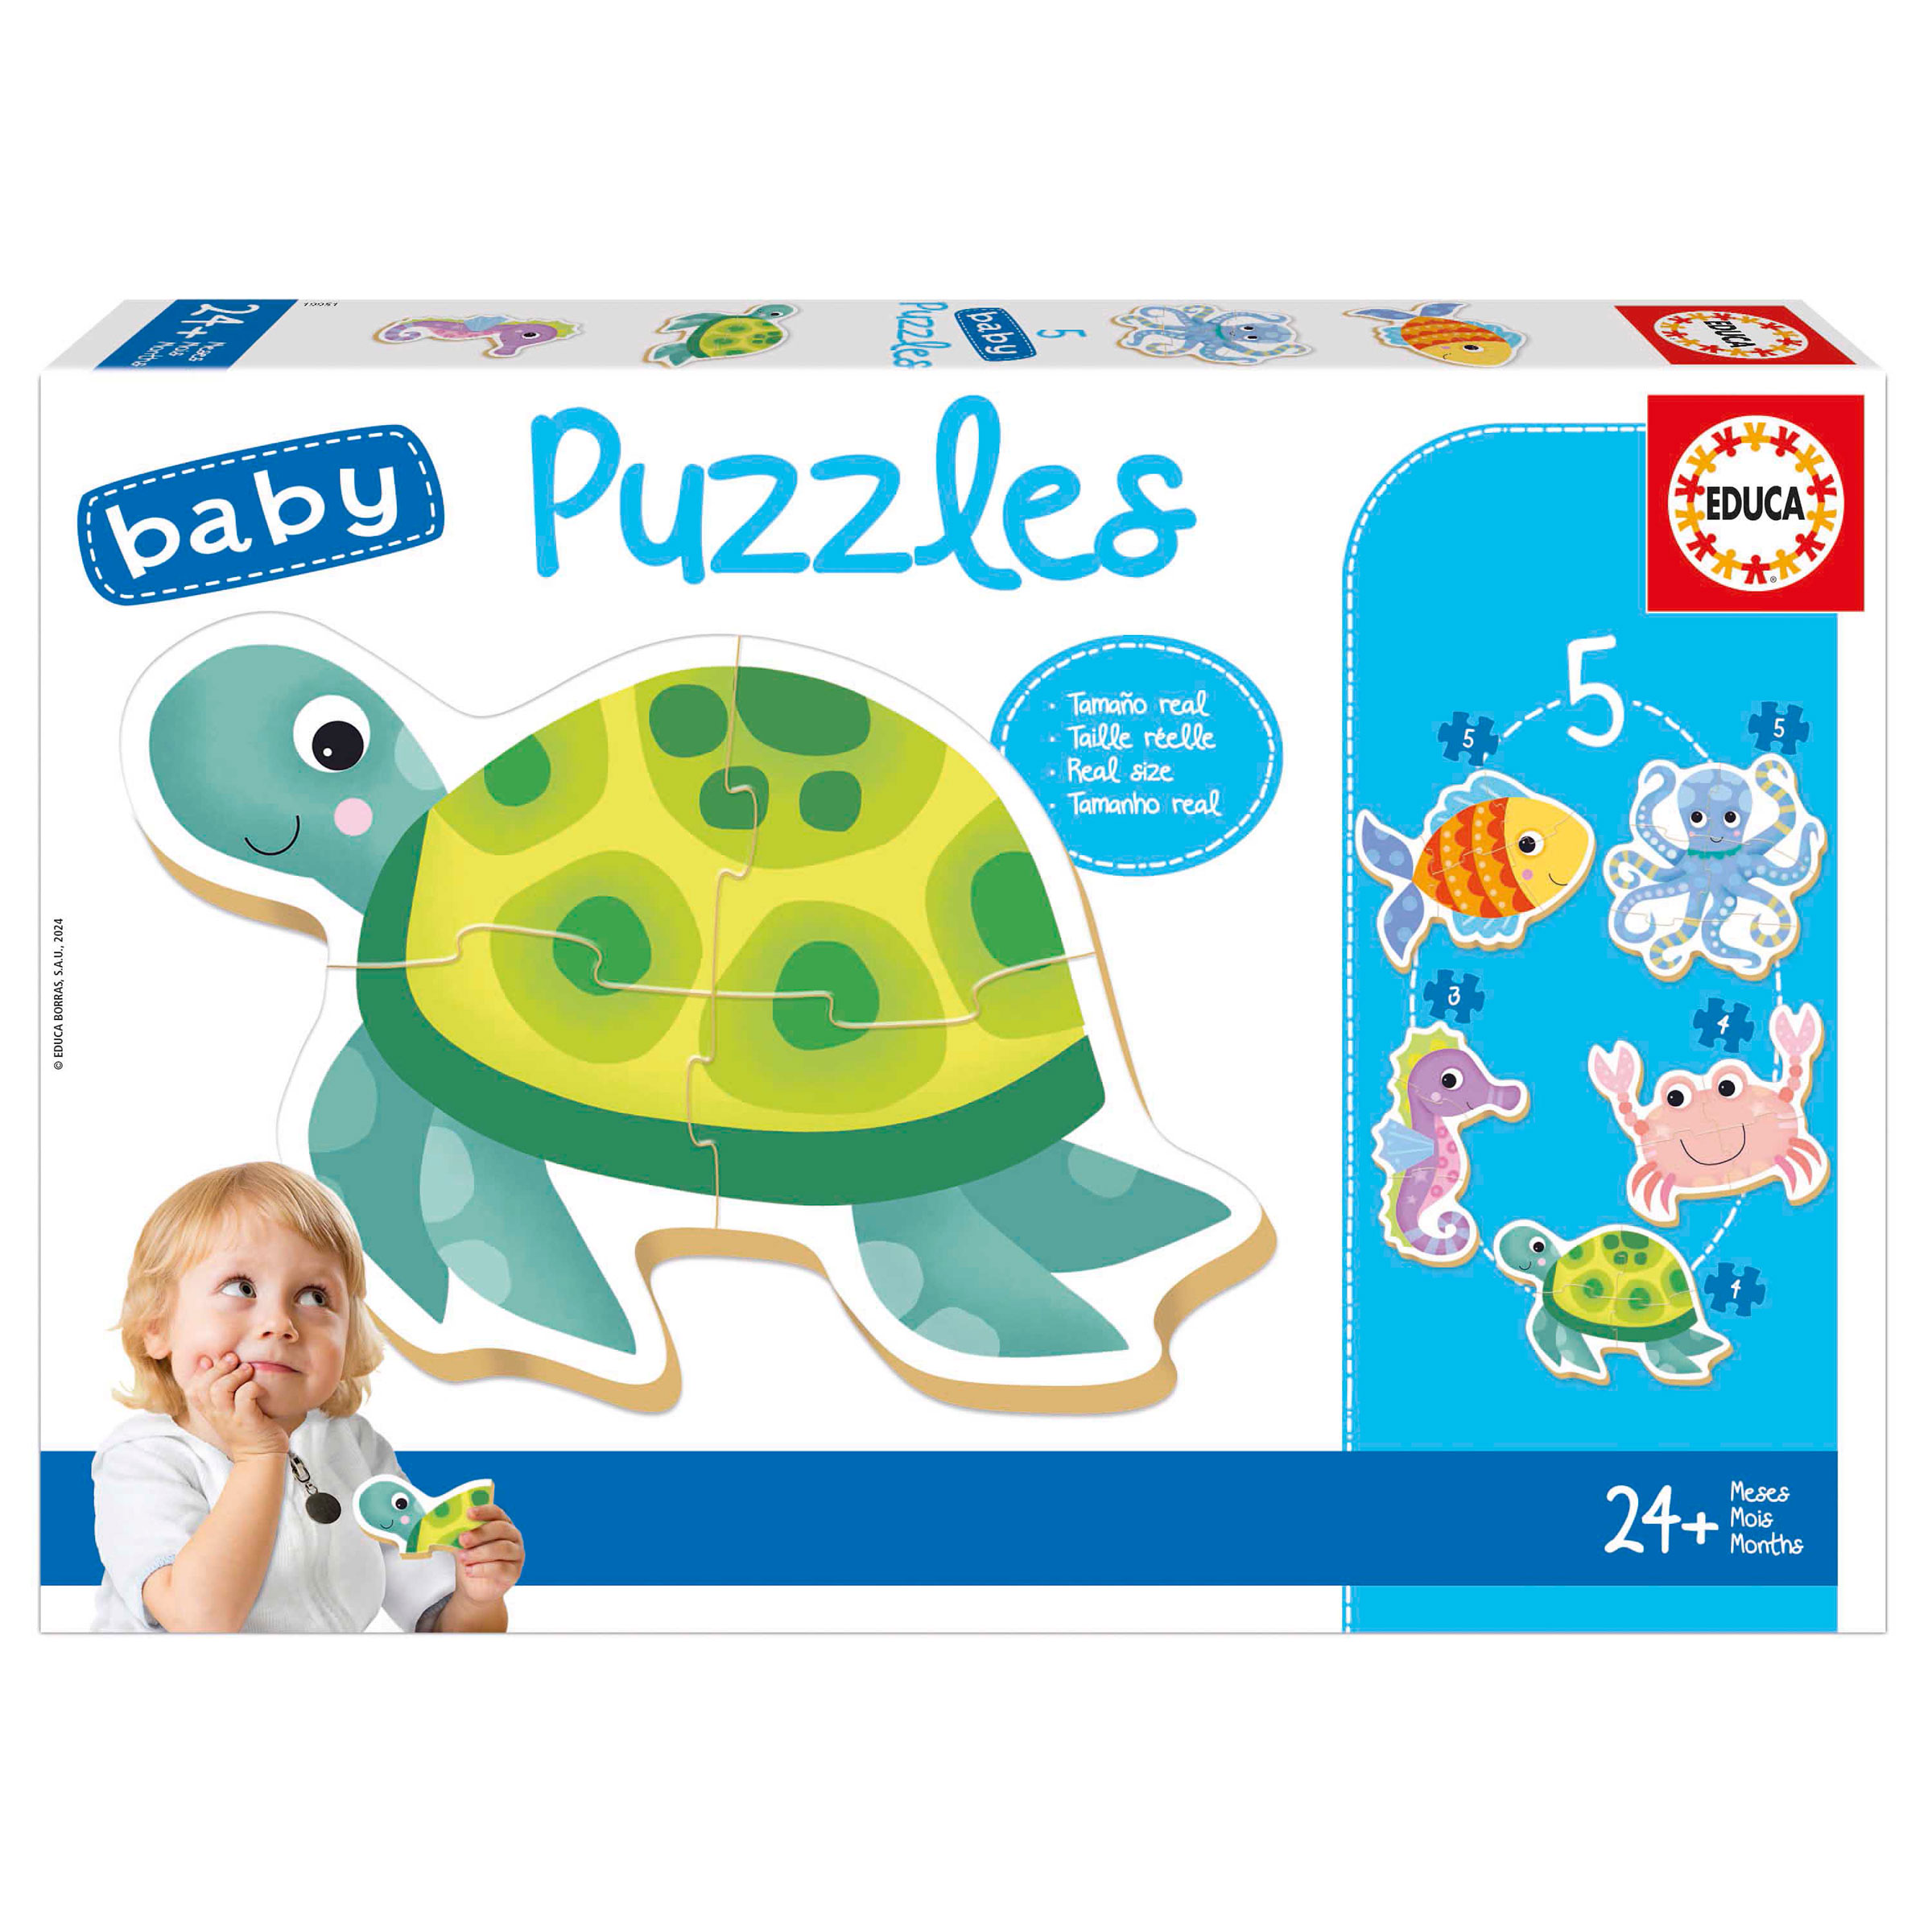 Baby Puzzles Faune Sauvage